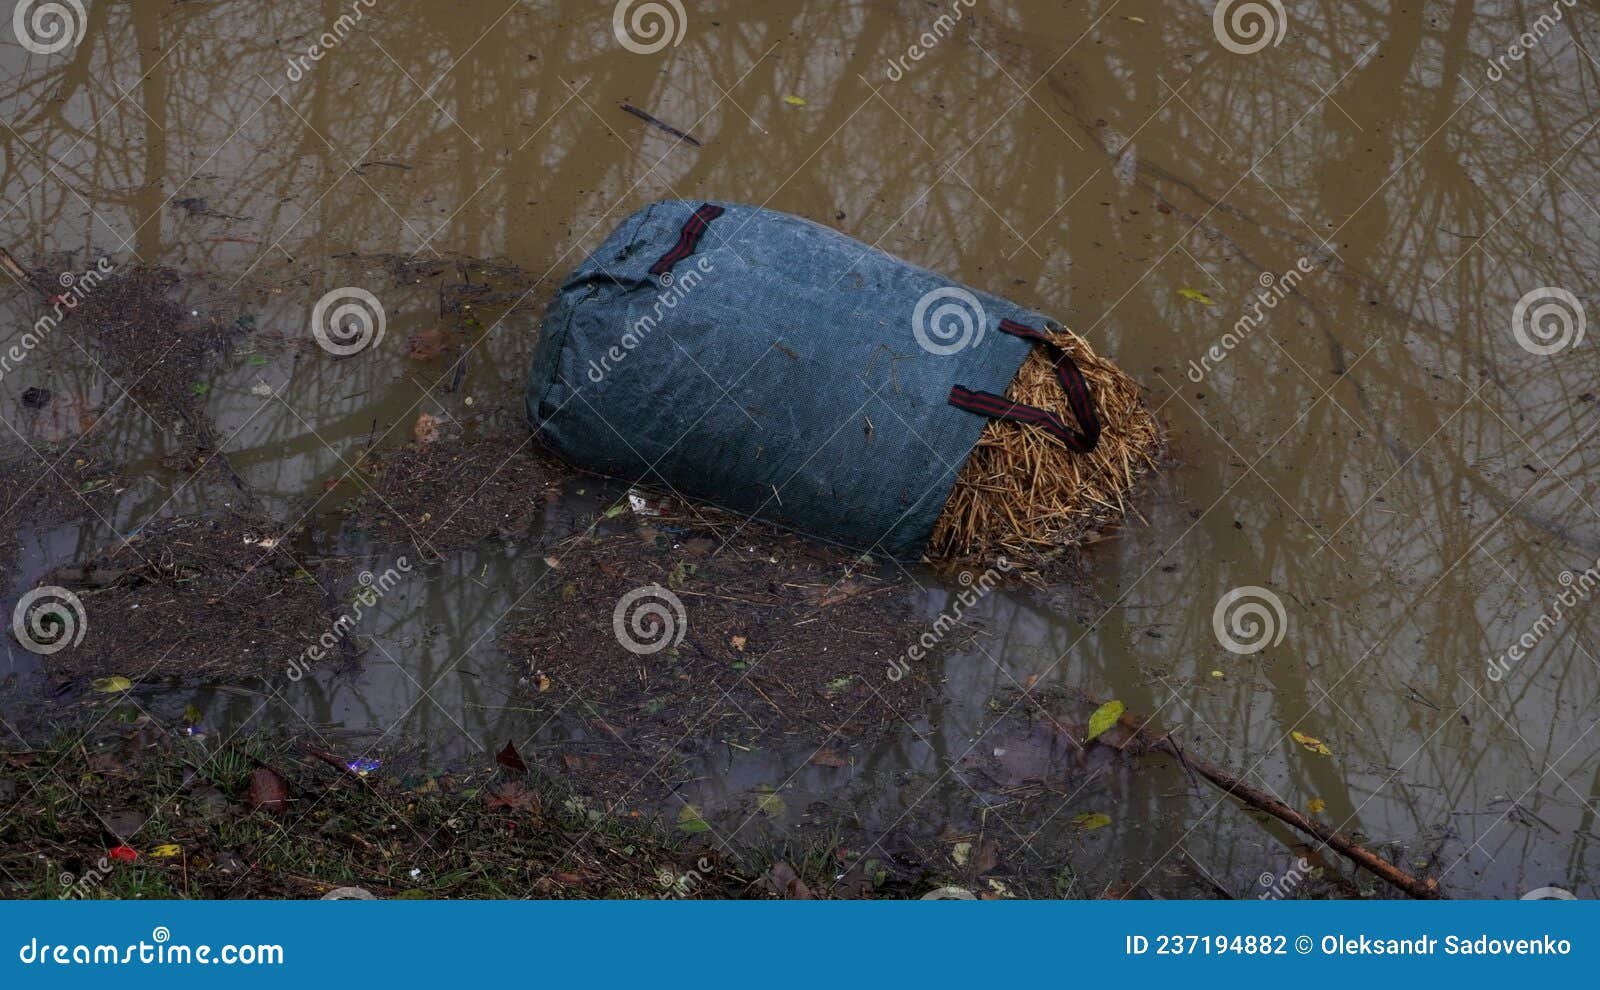 a women's bag filled with straw lies in the water on